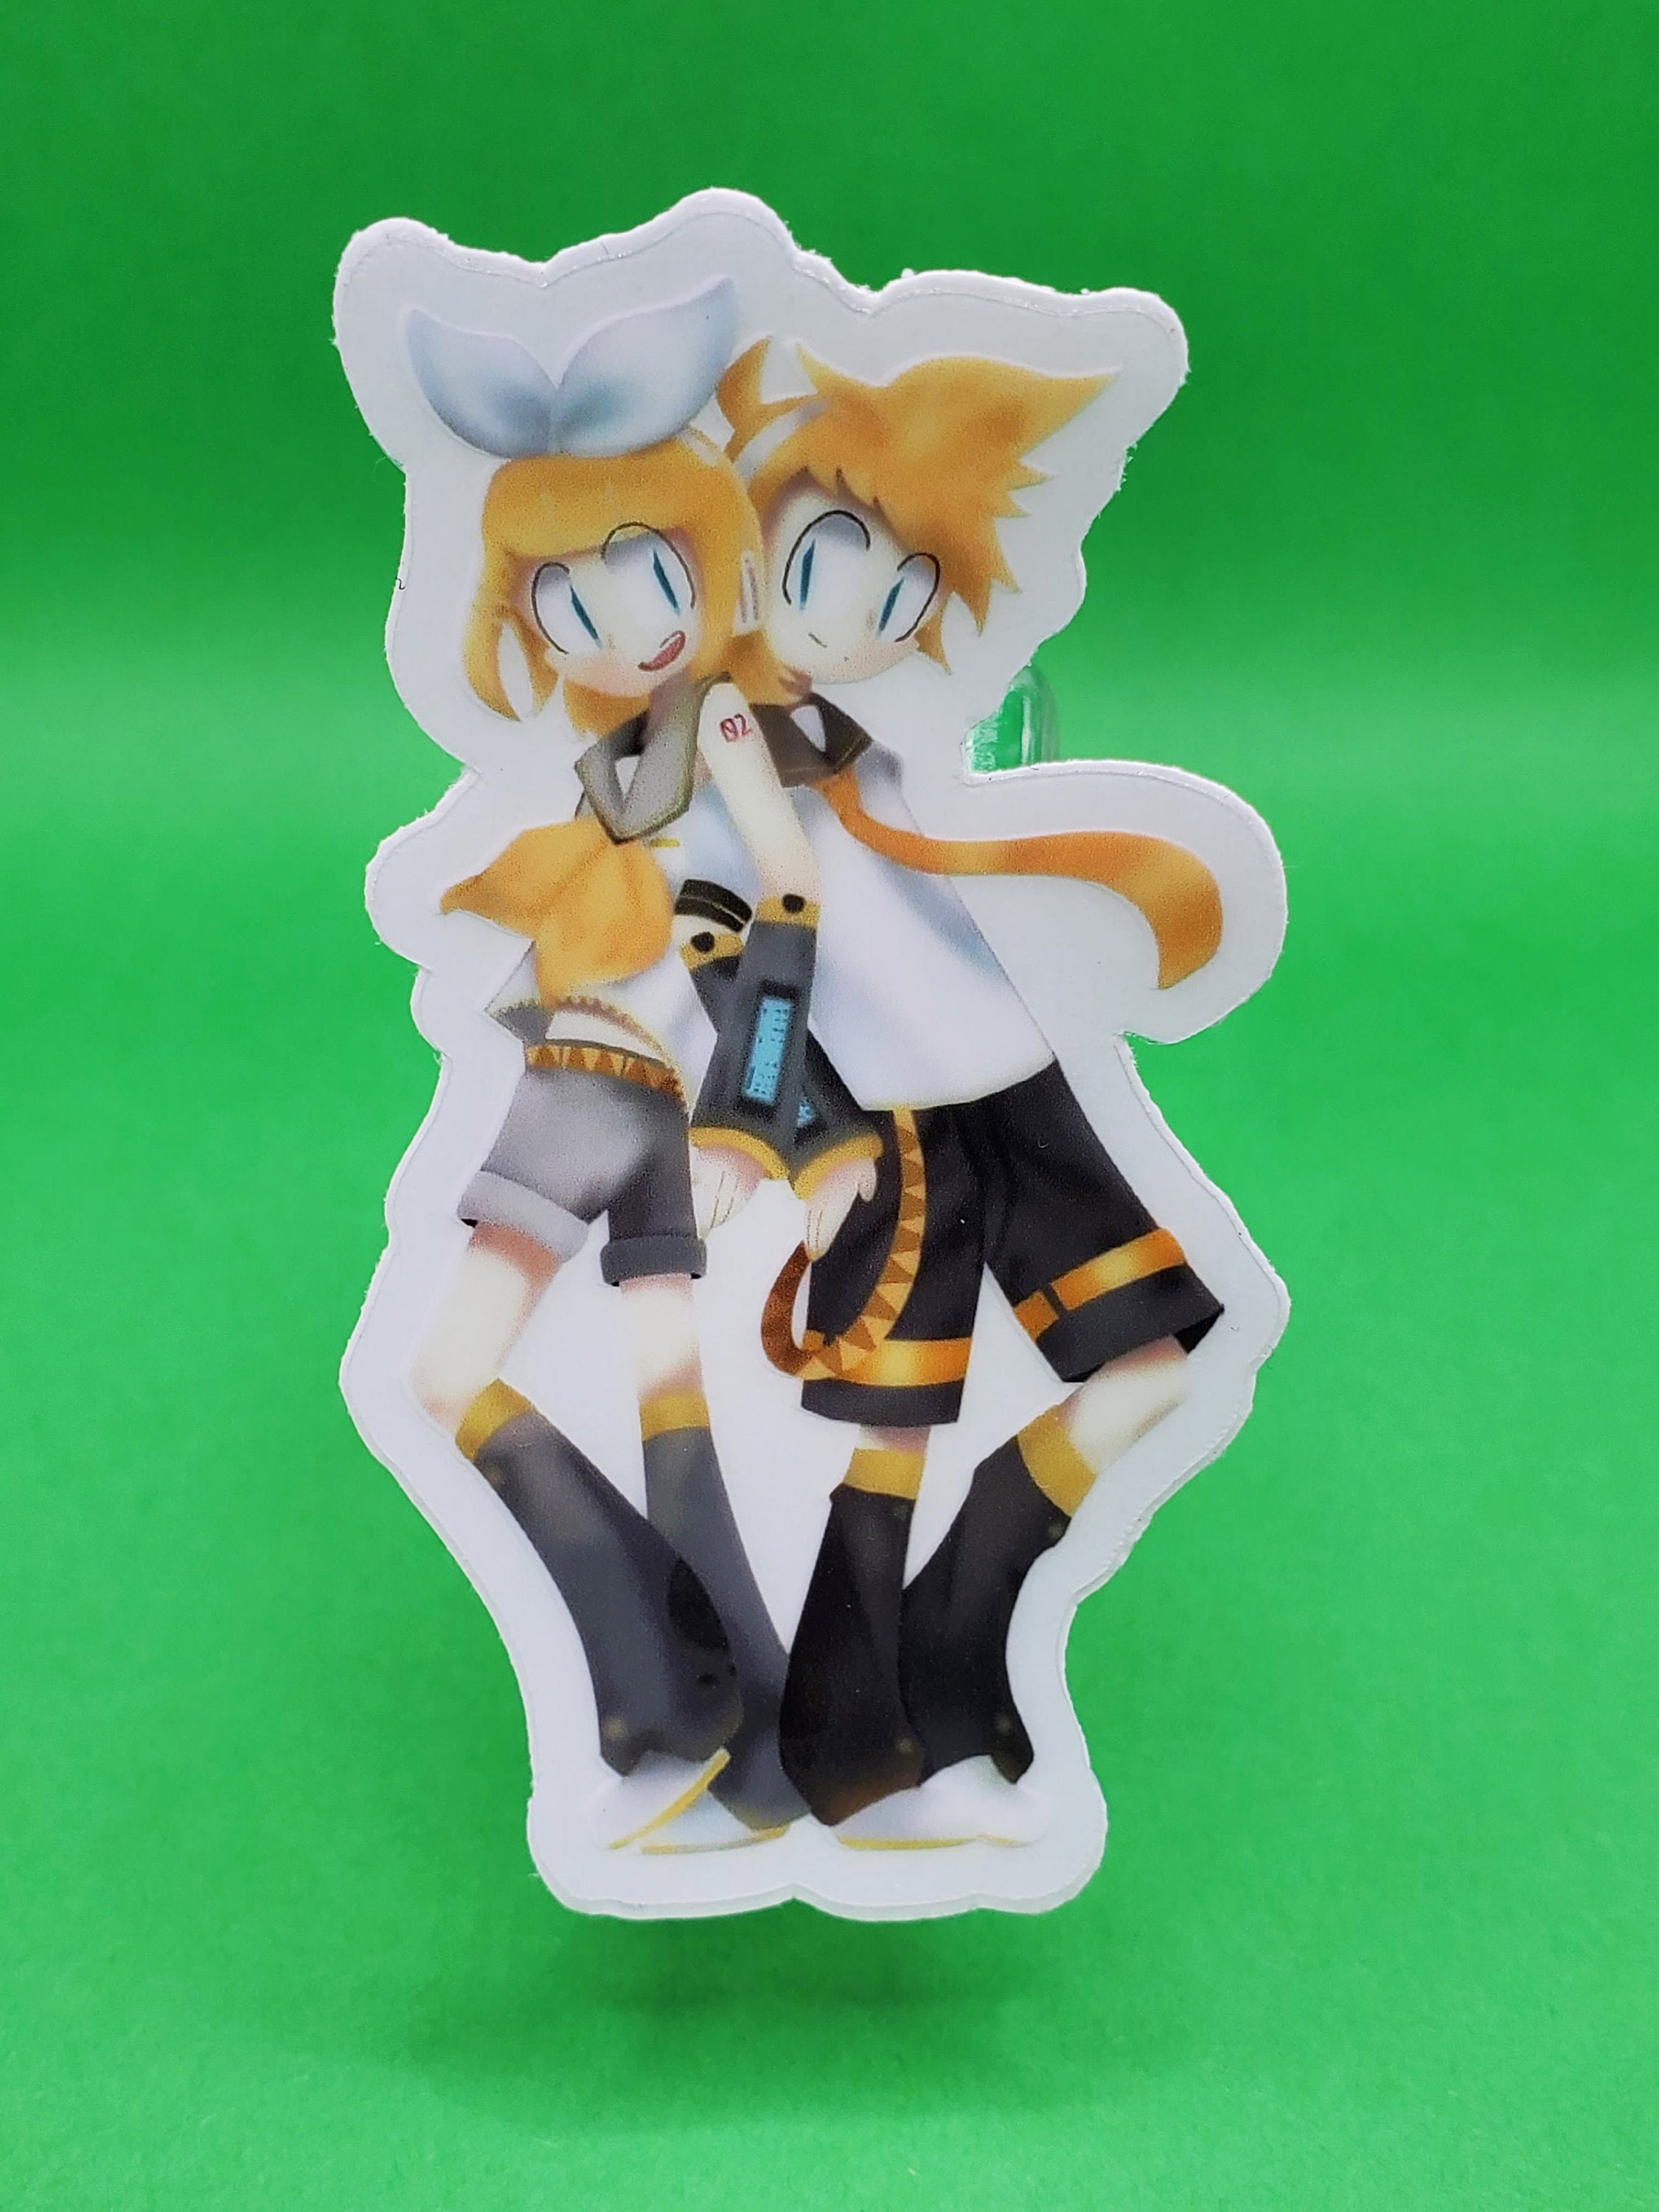 Vocaloid Rin and Len Holographic and Vinyl Stickers weatherproof